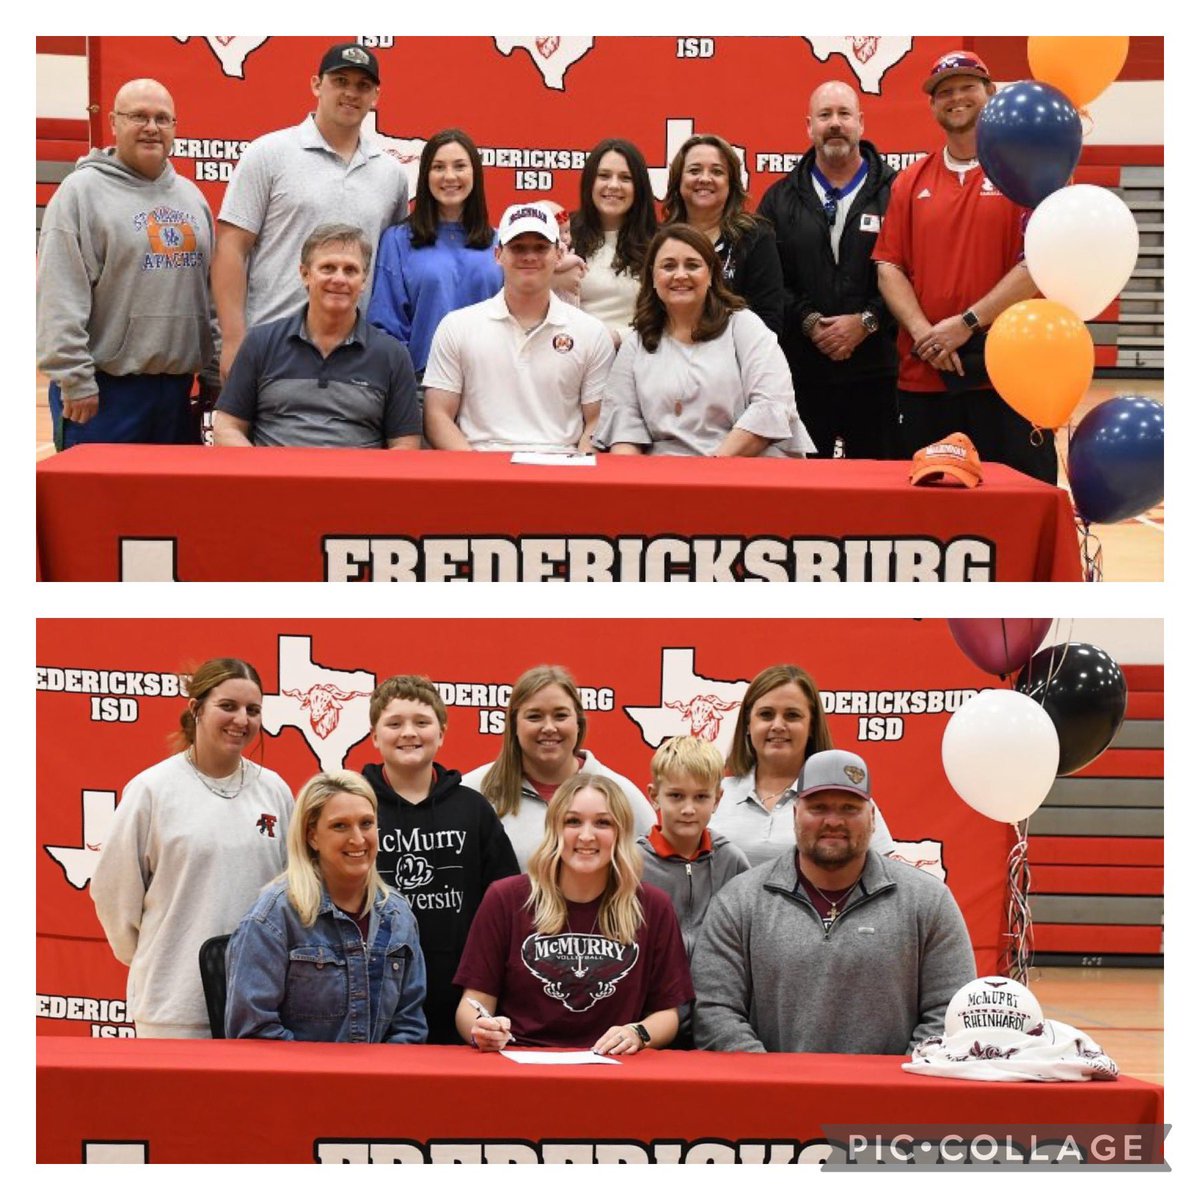 February 7th was a special day honoring 8 Battlin’ Billies who will continue their athletic careers at the collegiate level. Thank you to everyone who played a part in encouraging these kids day in and day out! #NationalSigningDay #AlwaysABillie 🐐❤️ #ItTakesEveryone